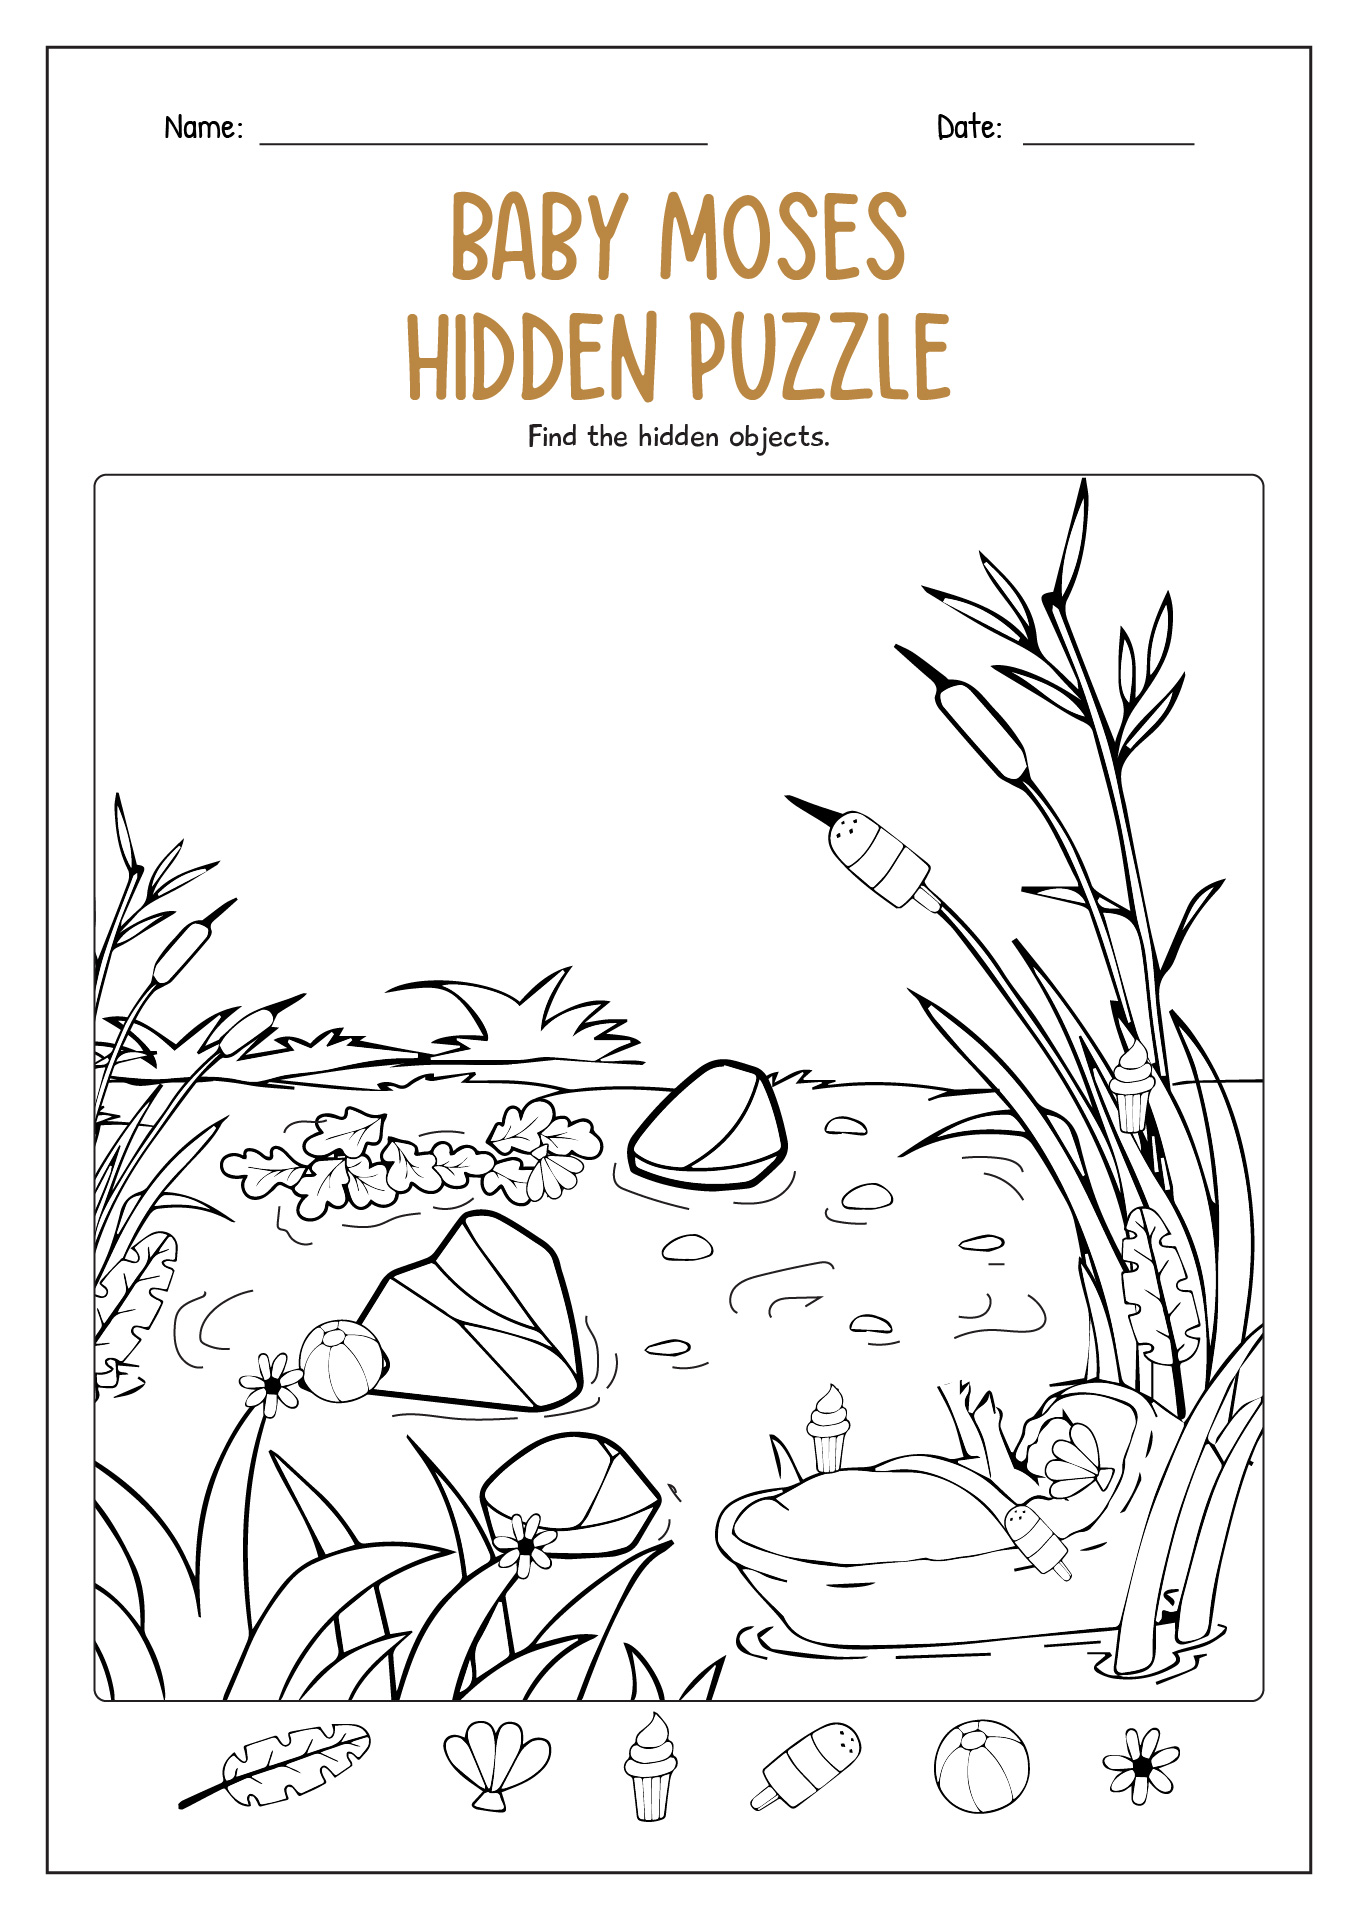 Baby Moses Hidden Puzzle